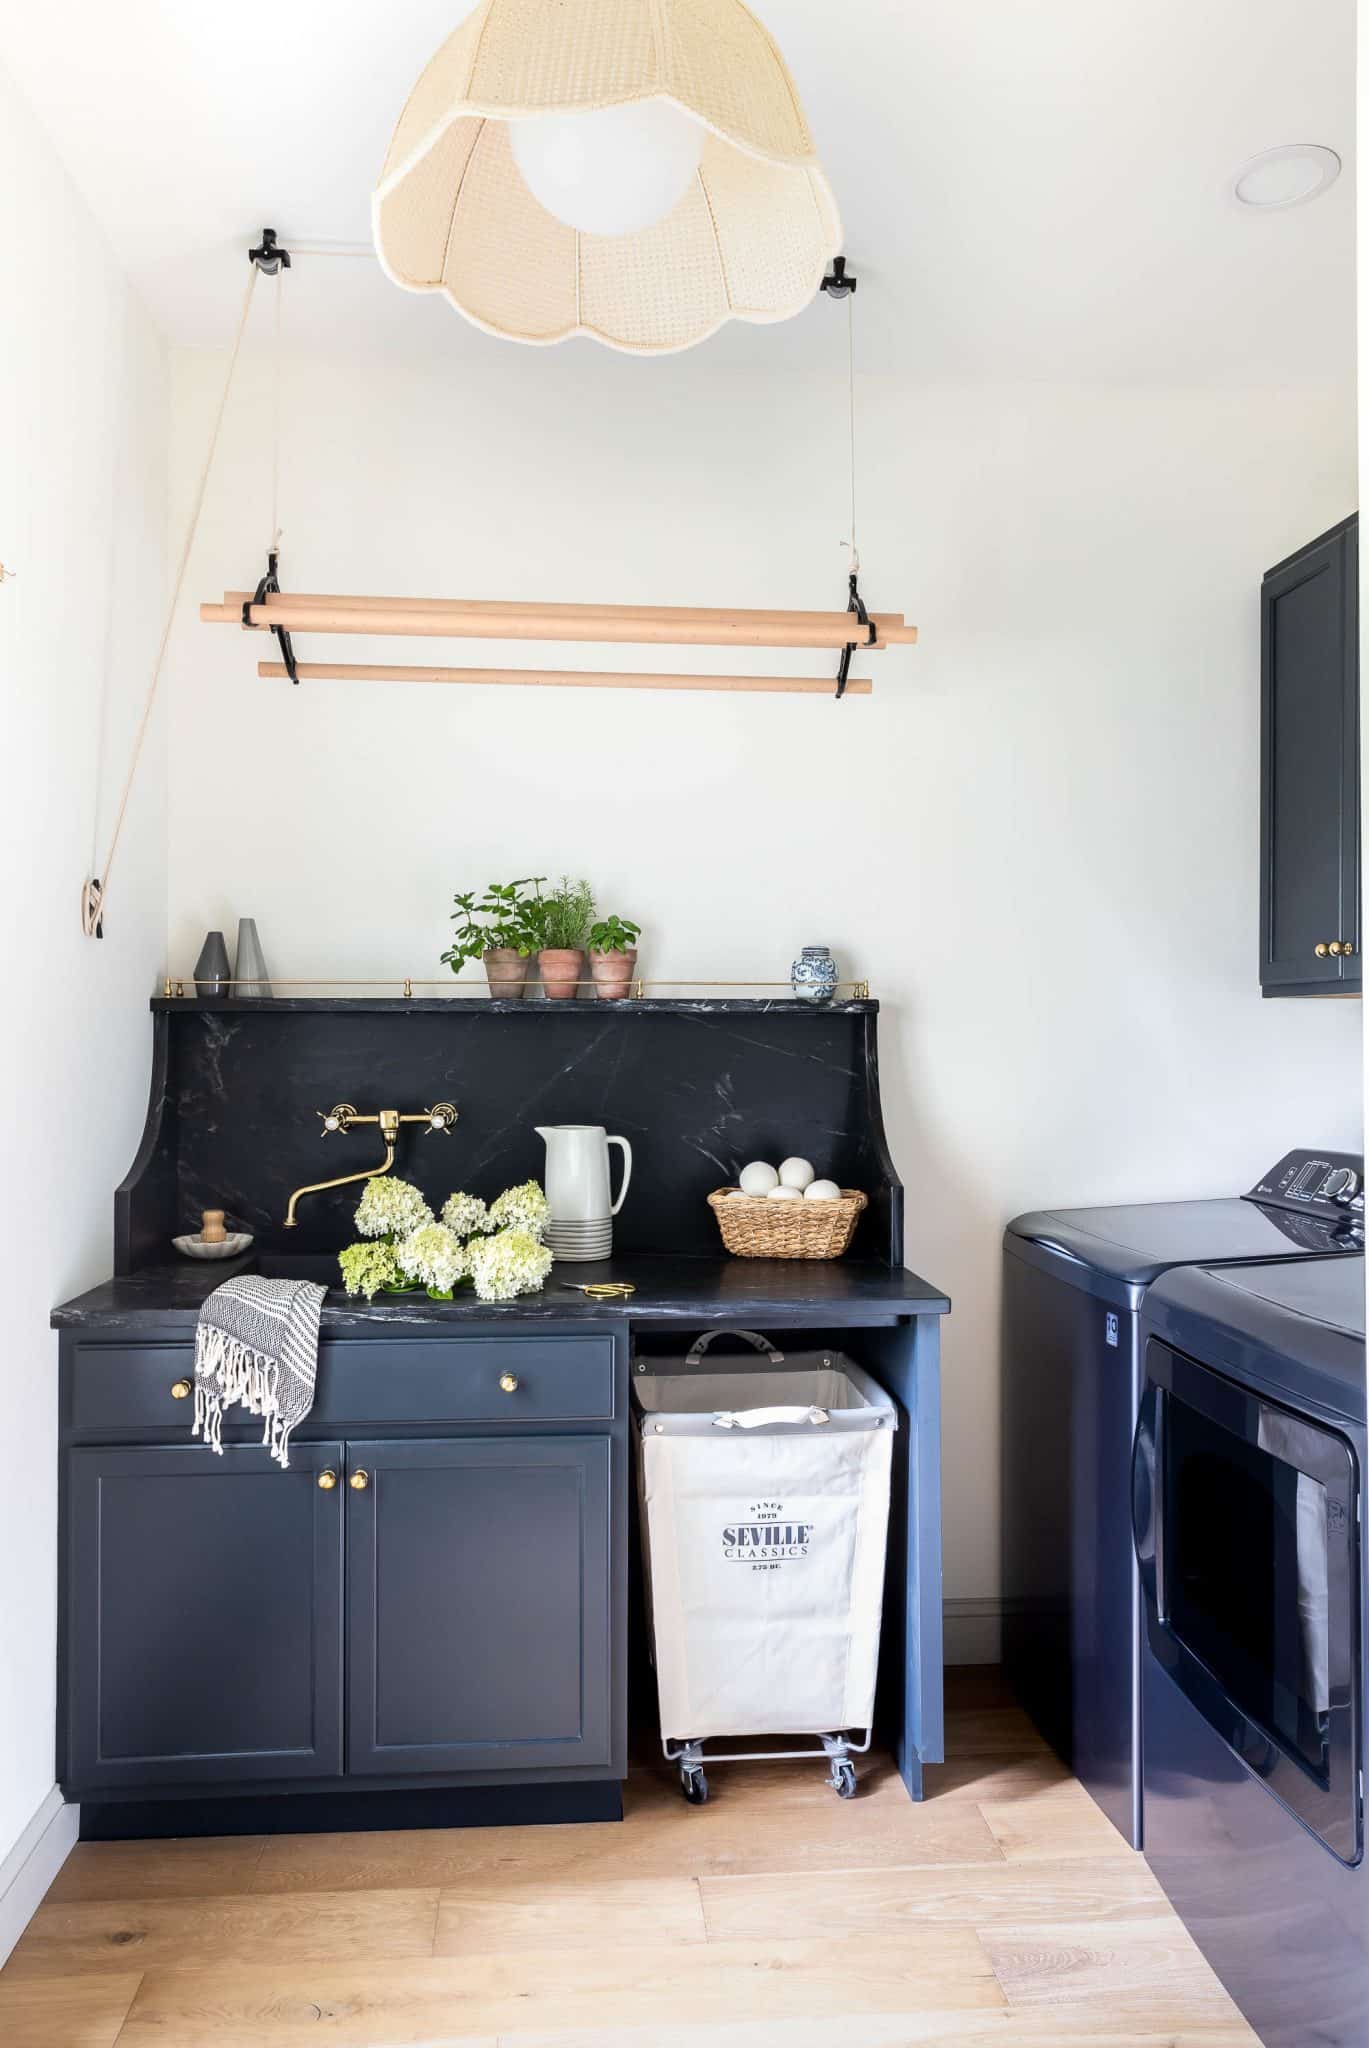 DIY Plywood Counter Top for the Laundry Room - Featuring Vintage